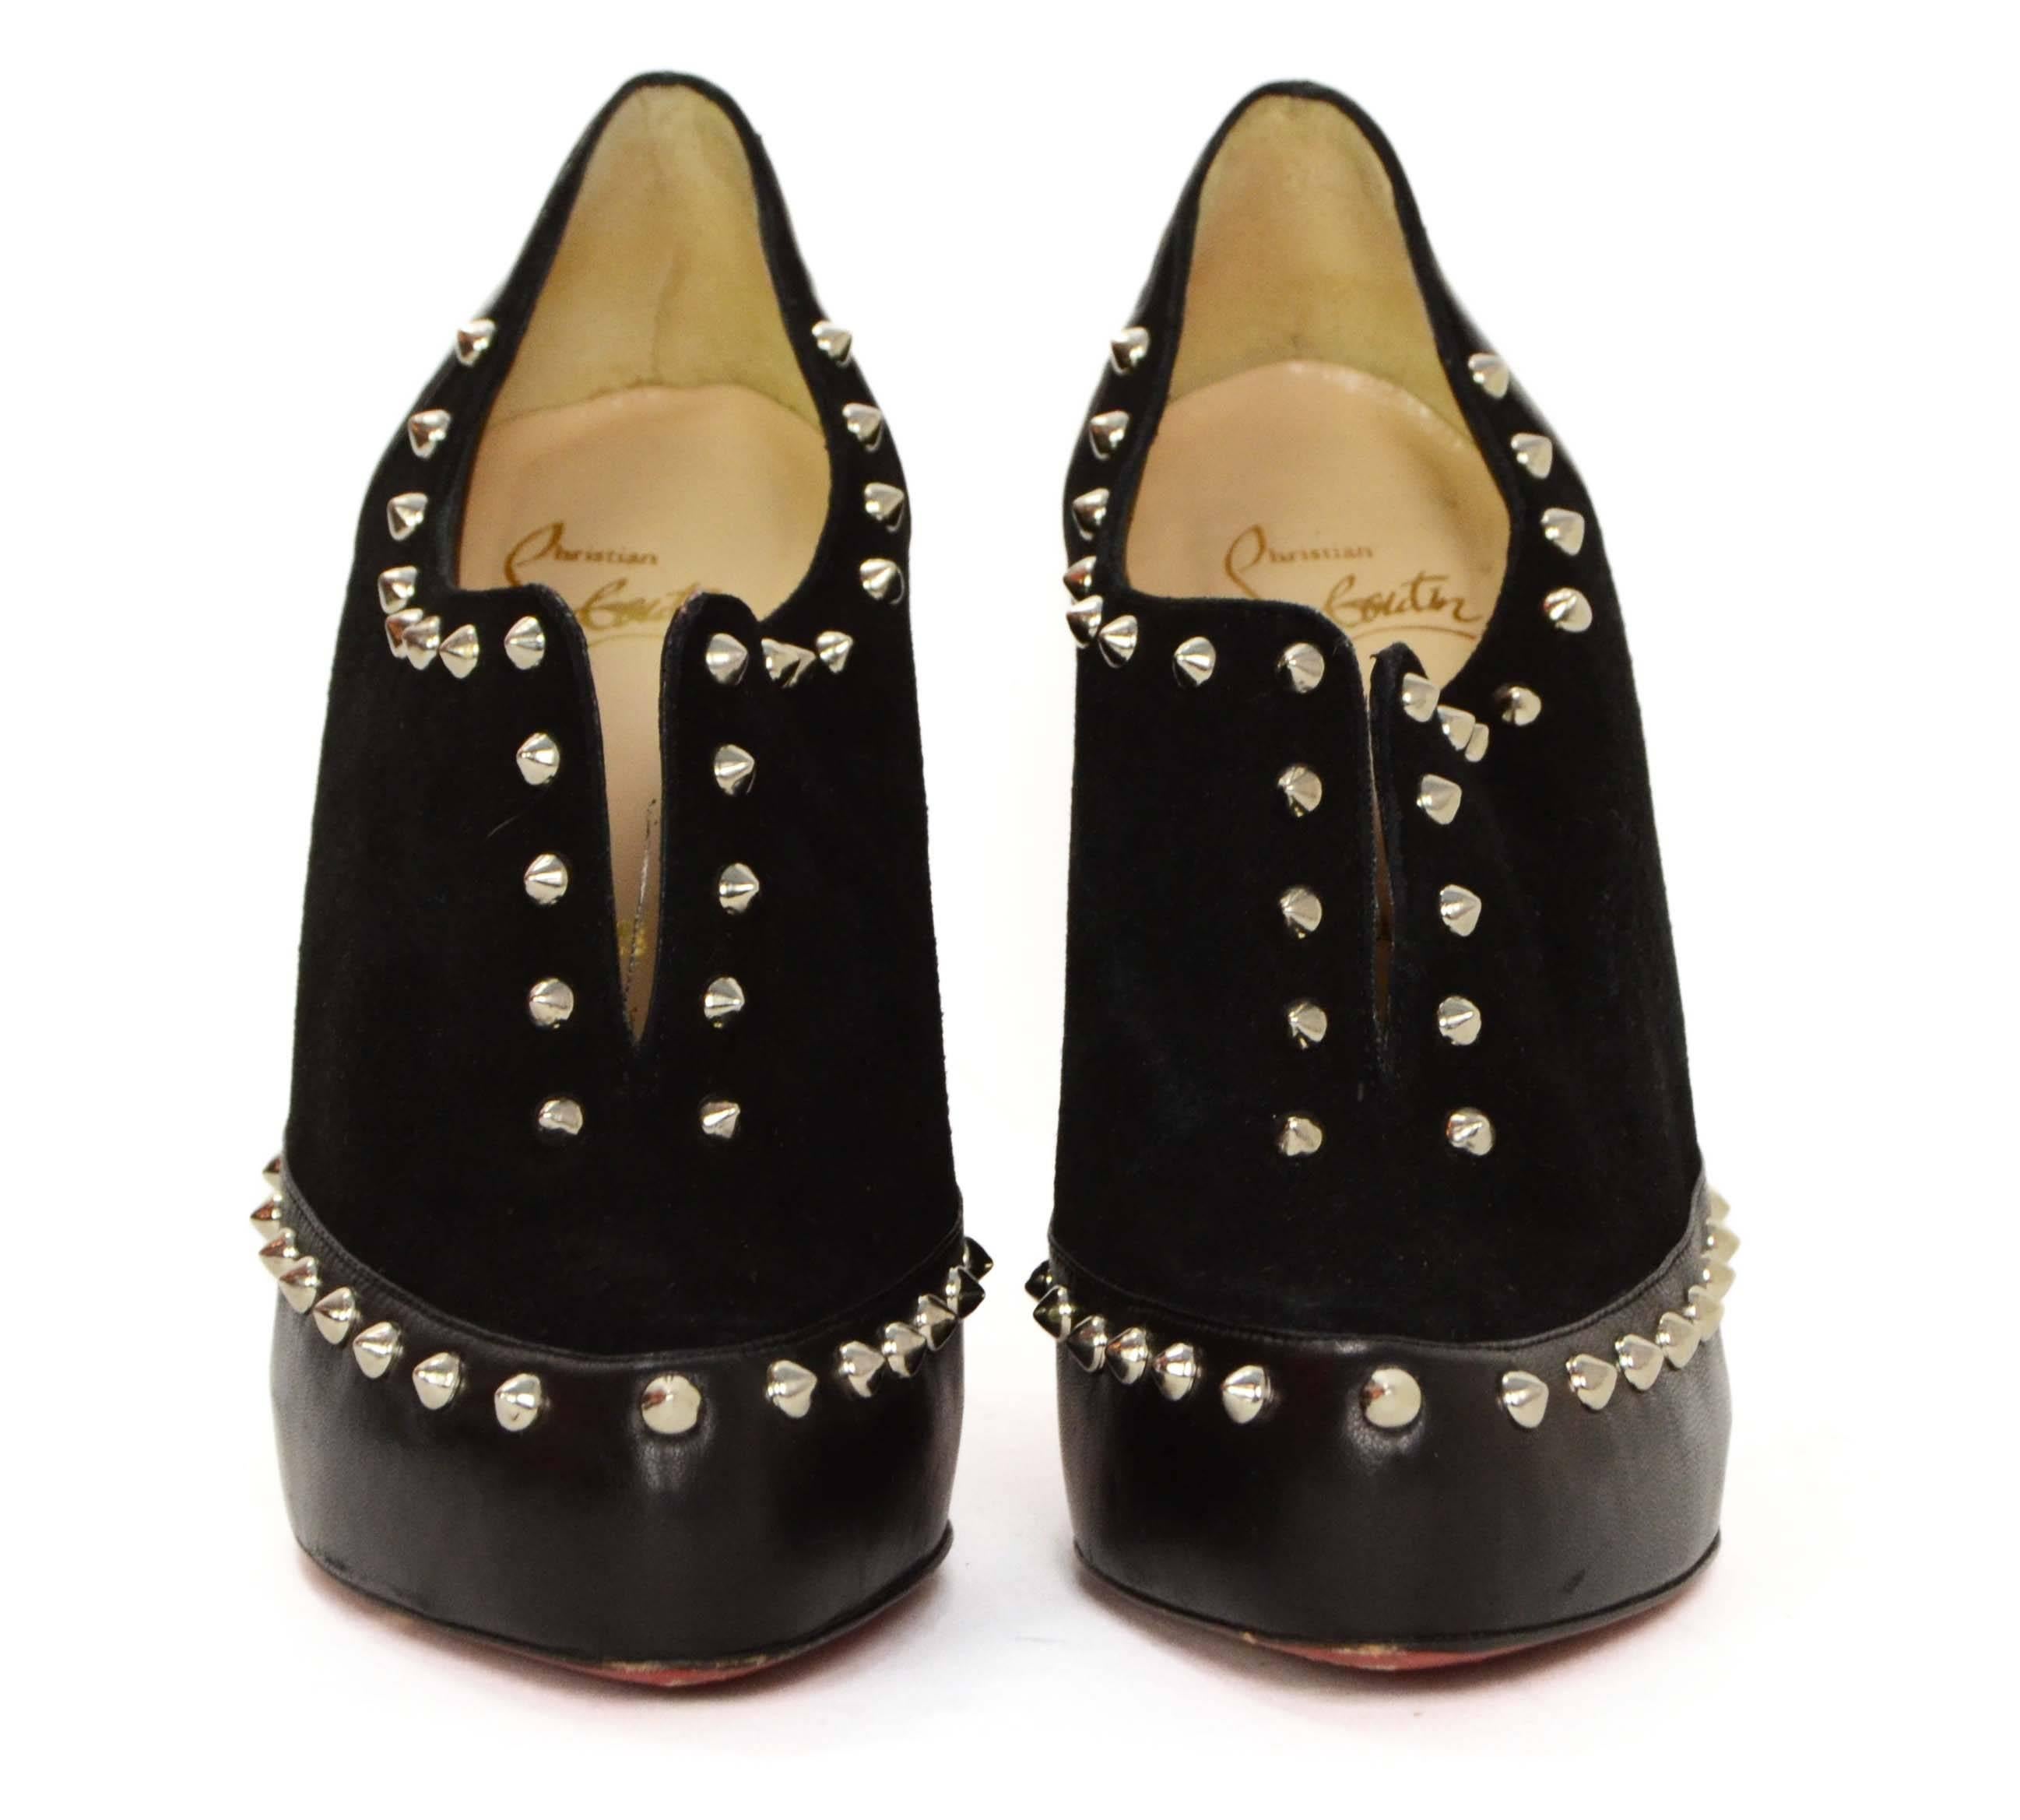 Christian Louboutin Black Suede and Leather Booties With Studs
Features a pointed toe and a slit at the front of the foot

    Made In: Italy

    Color: Black

    Materials: Suede, leather

    Closure/Opening: Slips on over foot

   